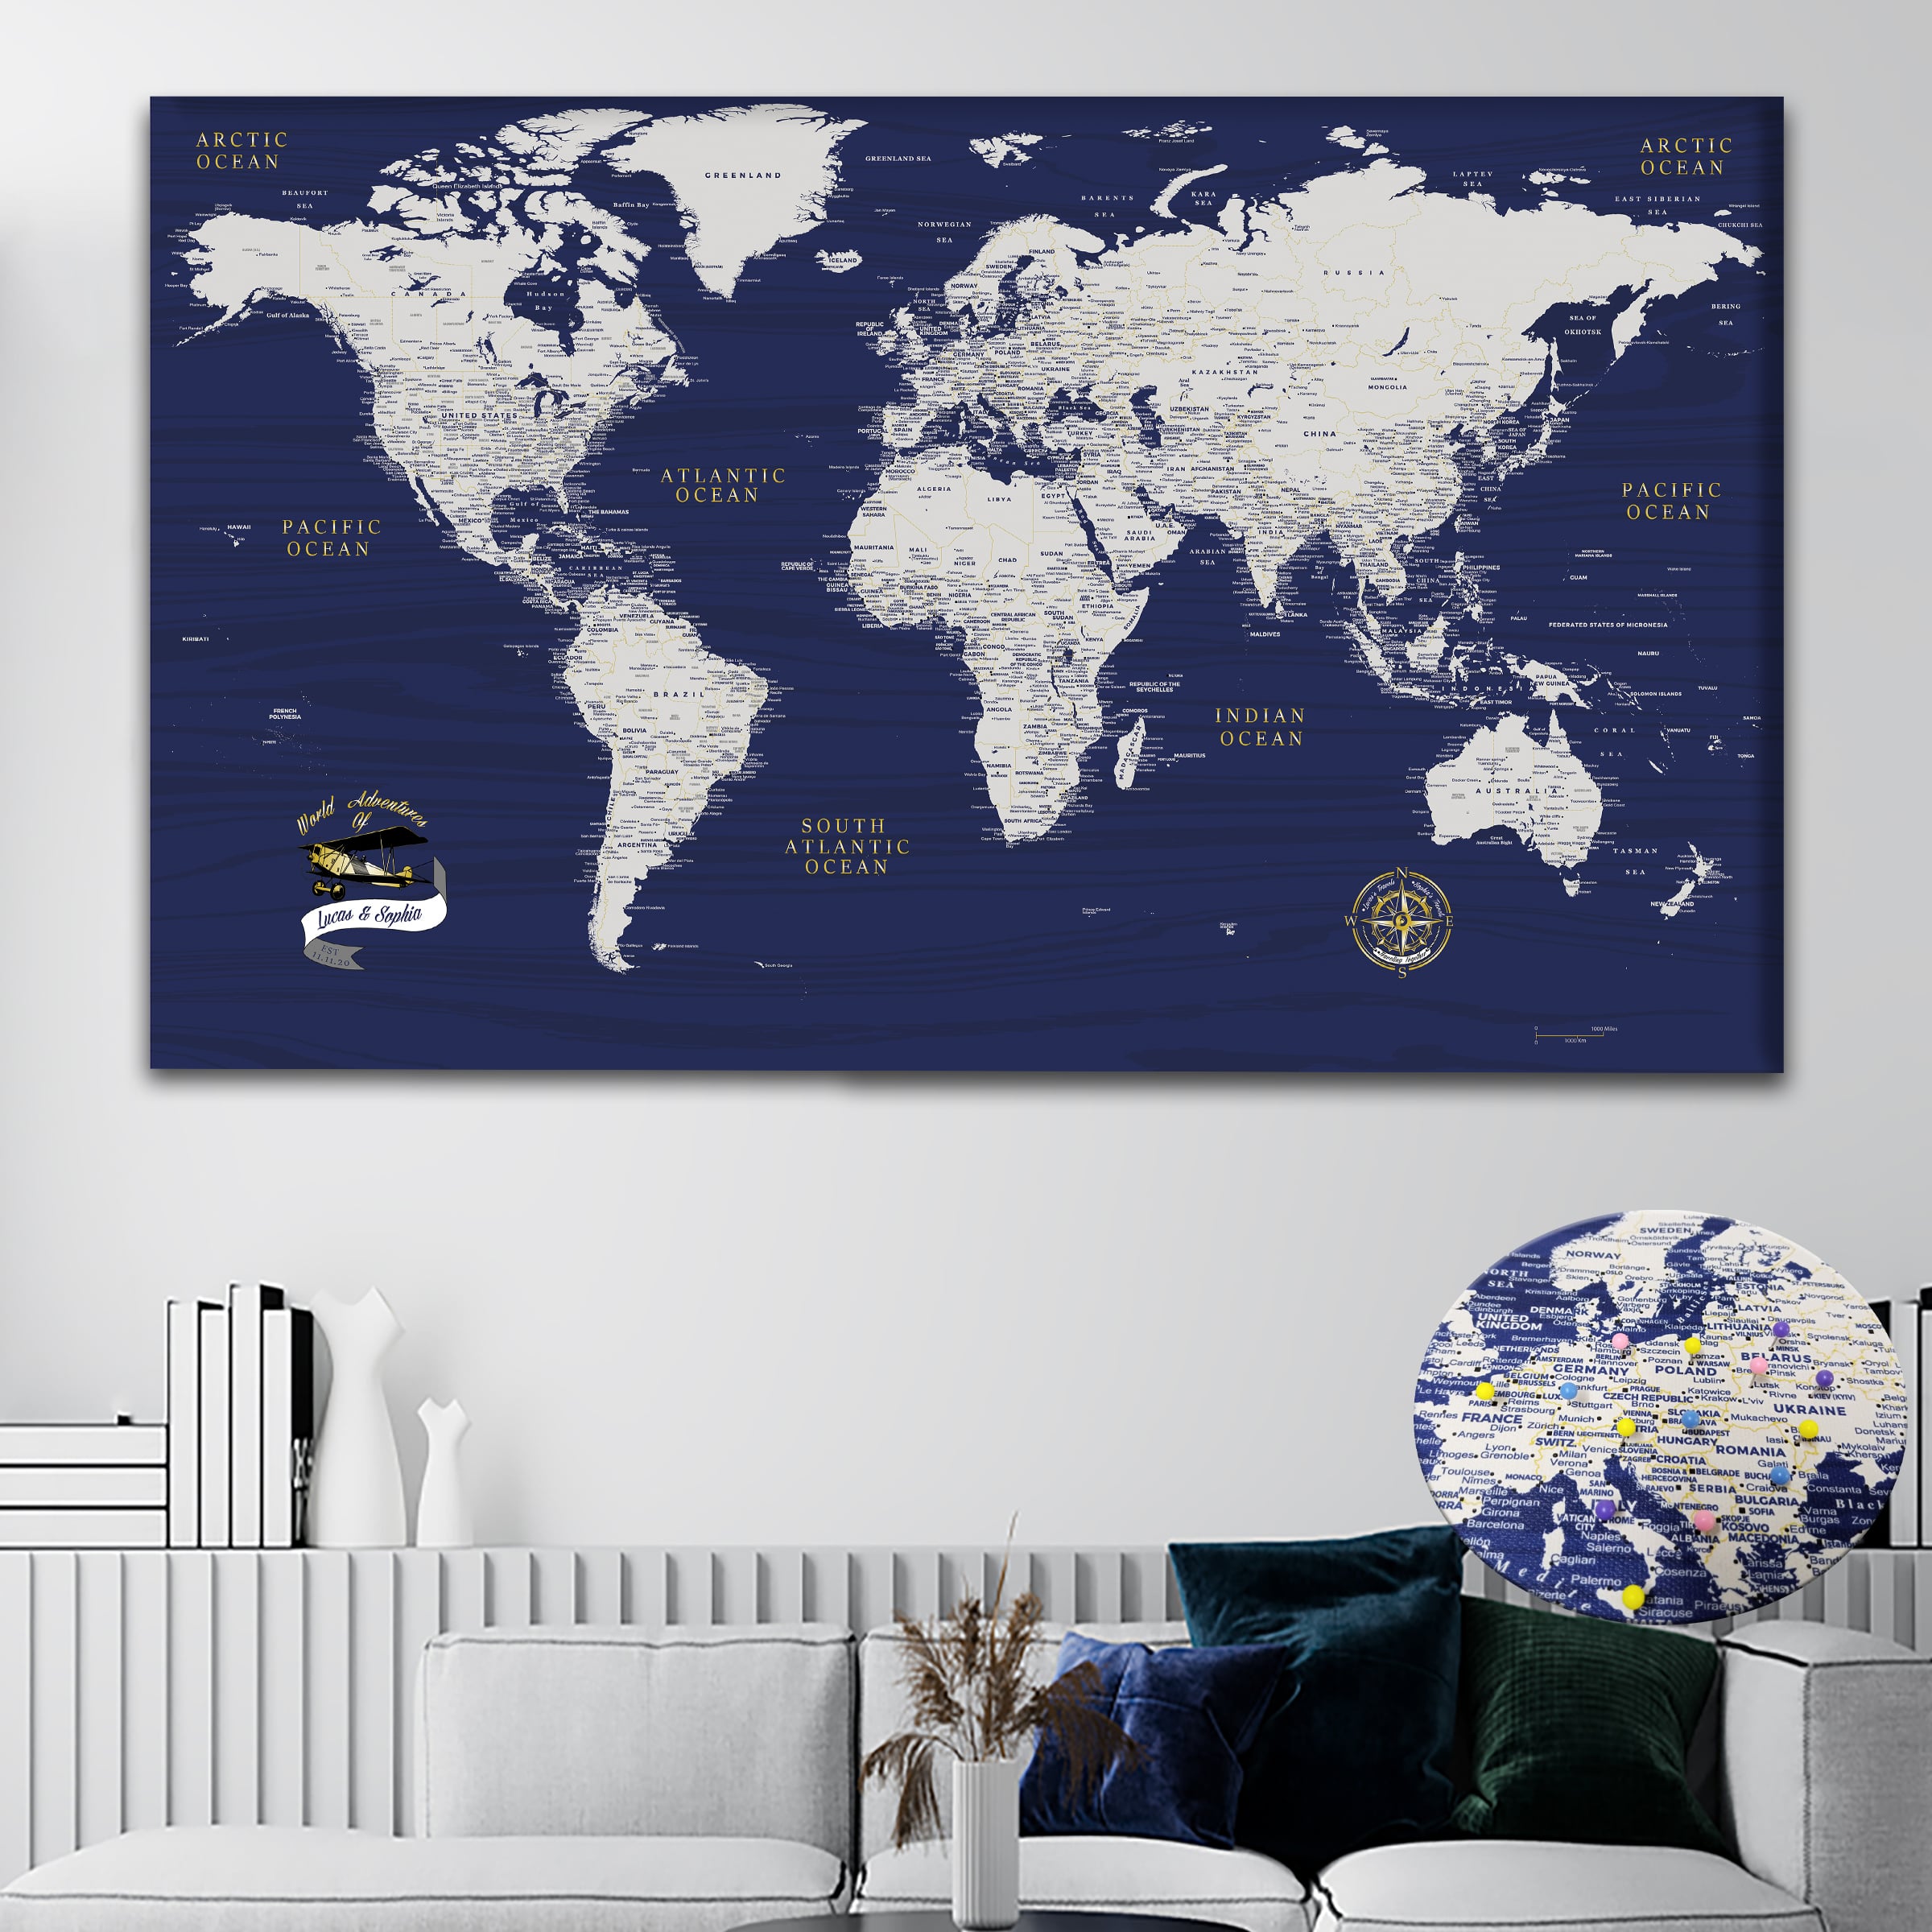 Nursery Wall Decor, Places You've Been World Map, Large Push Pin Travel  Map, Home Decor, World Map Wall Art, Globe Art, Gifts for Apartment 